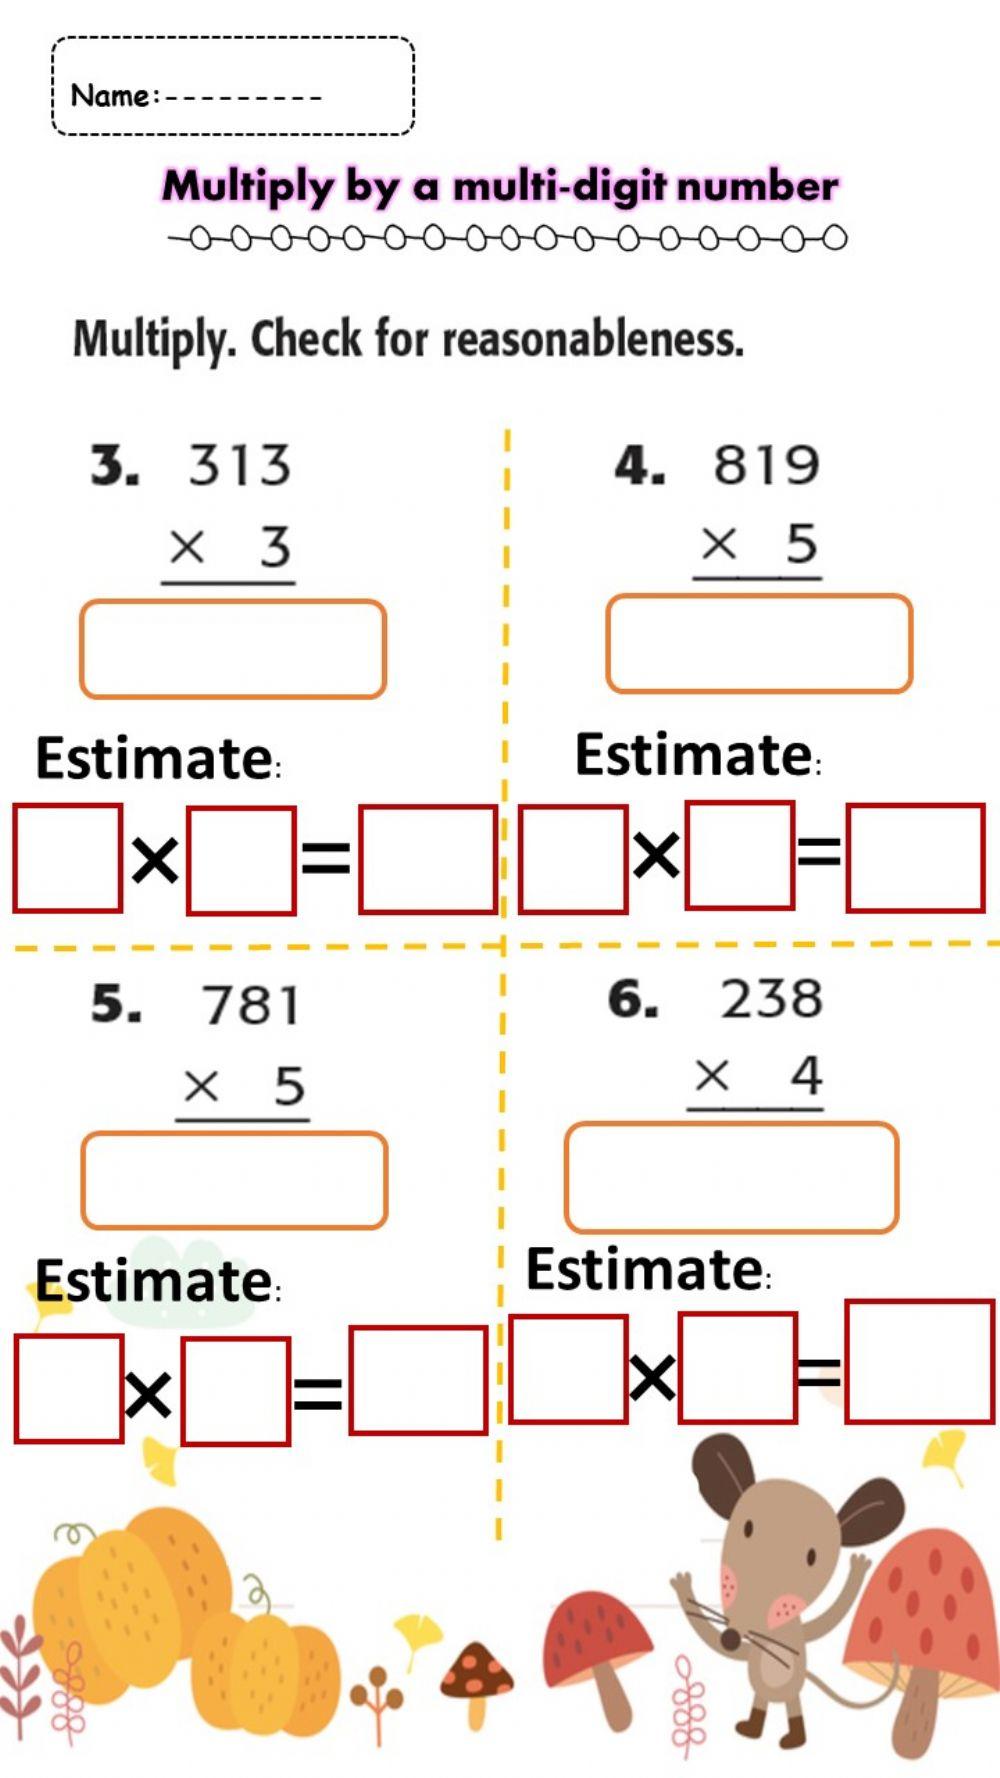 Multiply by a multi-digit number